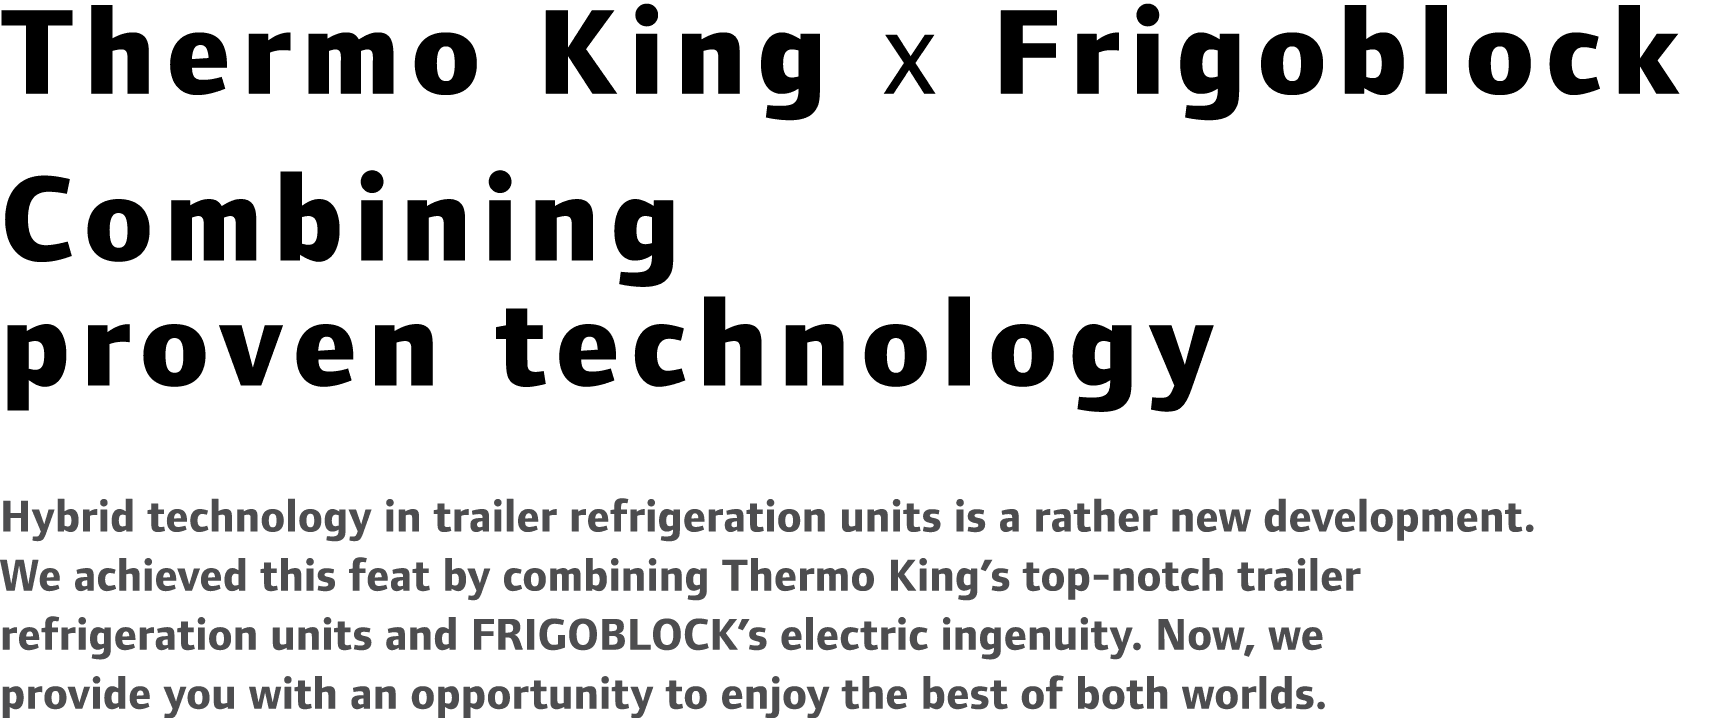 Thermo King x Frigoblock Combining proven technology Hybrid technology in trailer refrigeration units is a rather new...